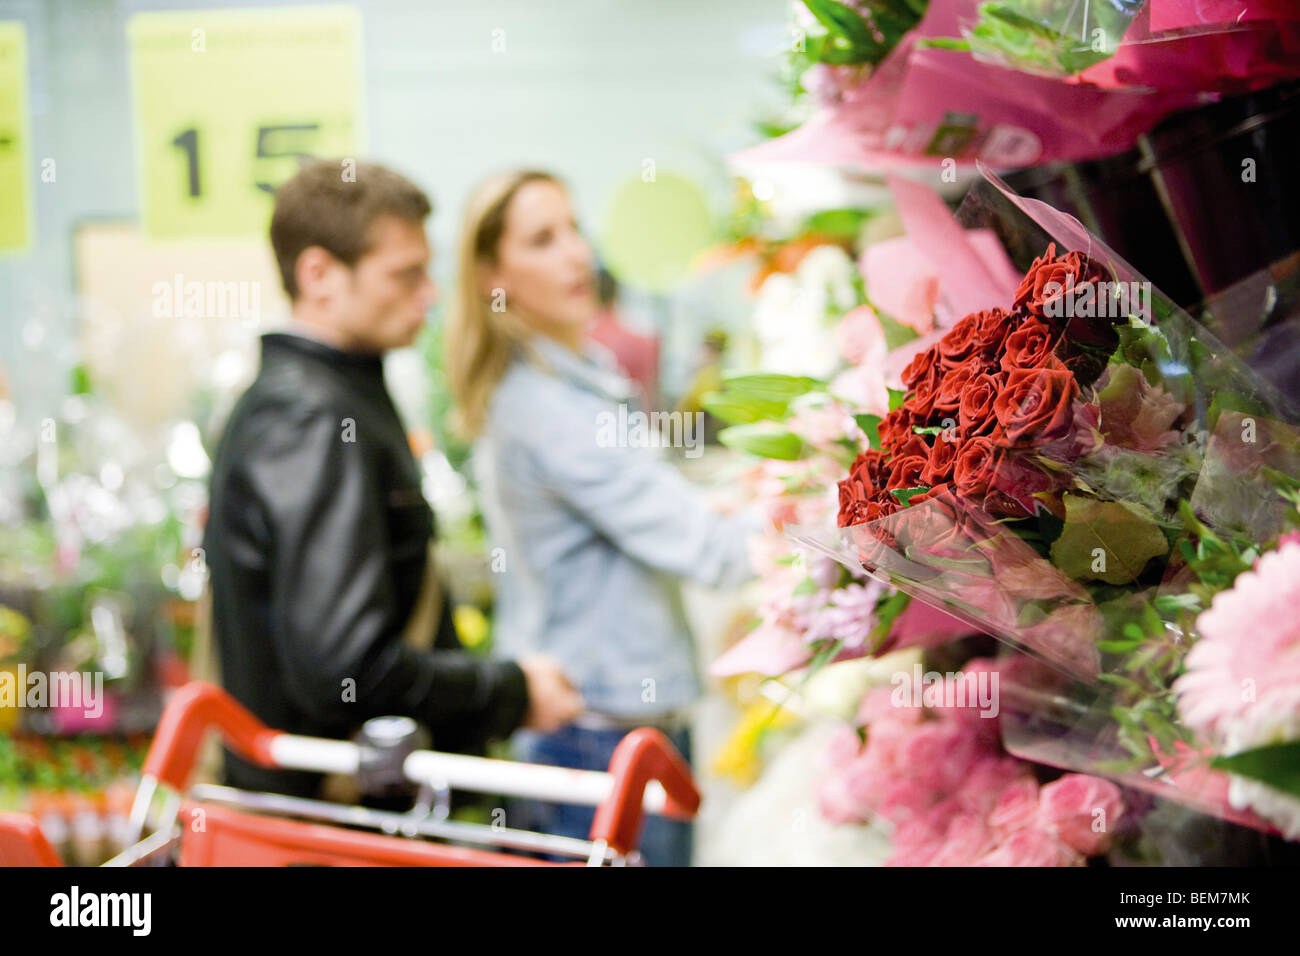 Flower bouquets at flower shop, couples browsing in background Stock Photo